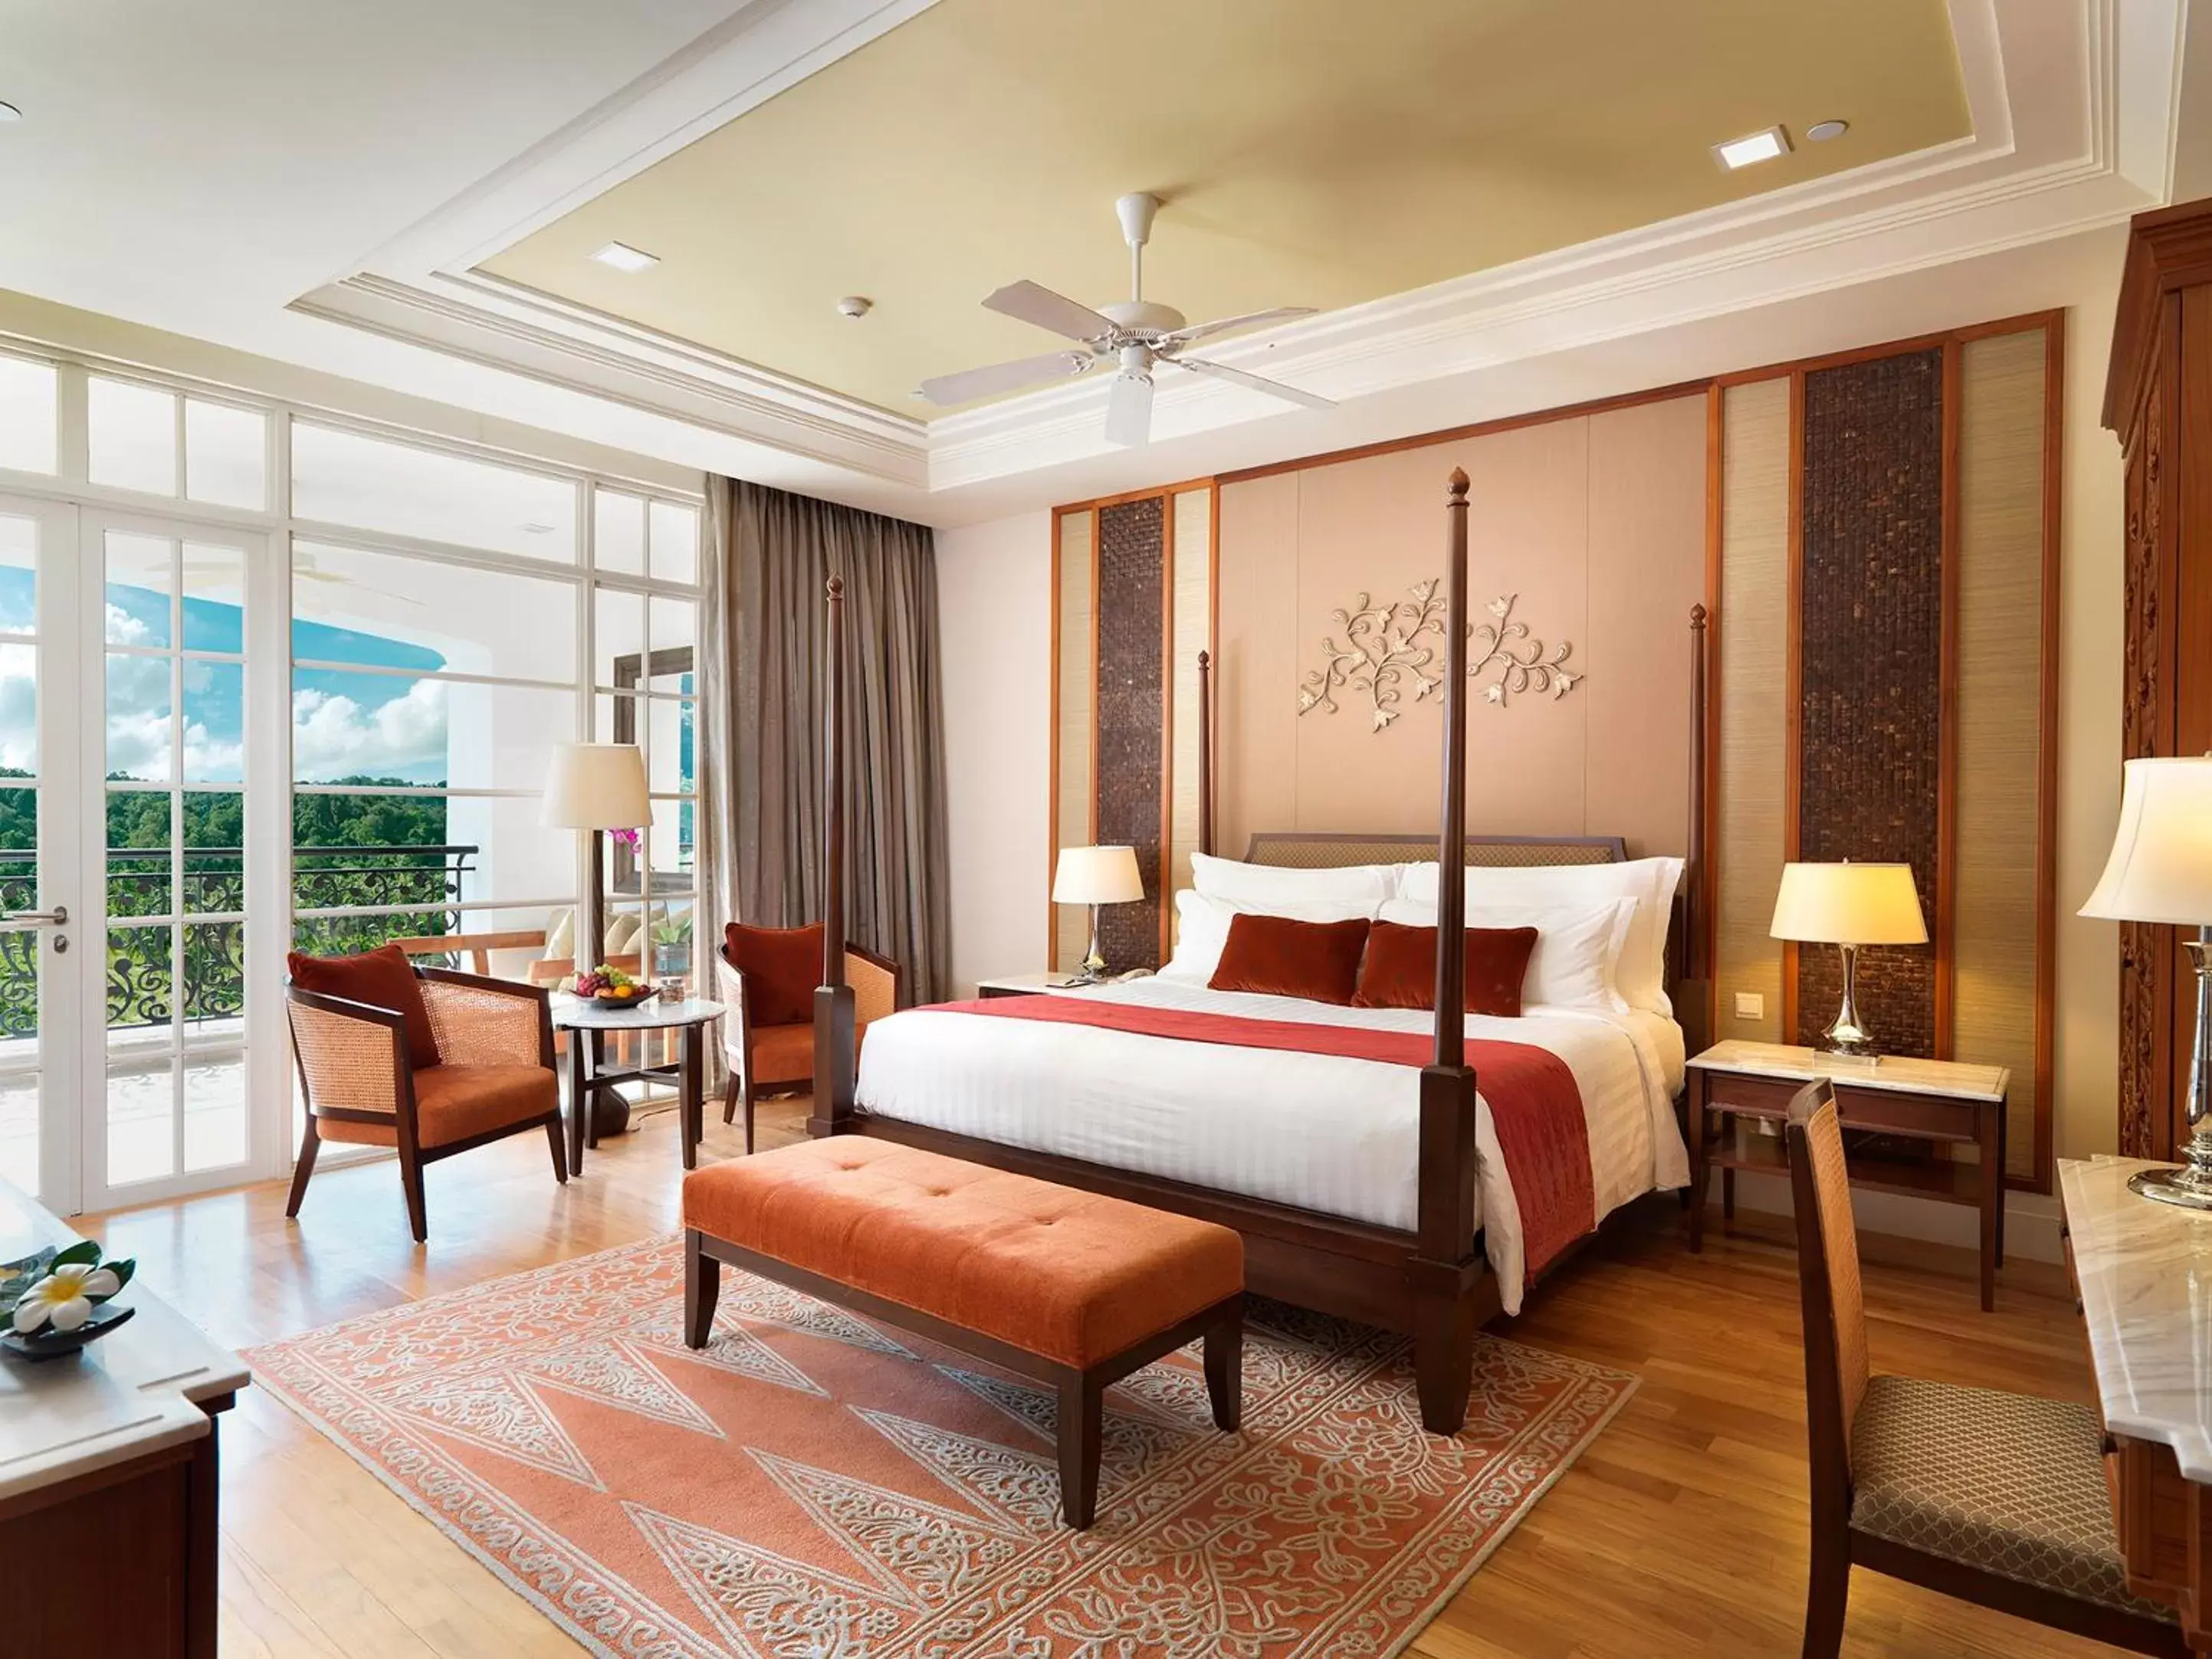 Bedroom in The Danna Langkawi - A Member of Small Luxury Hotels of the World